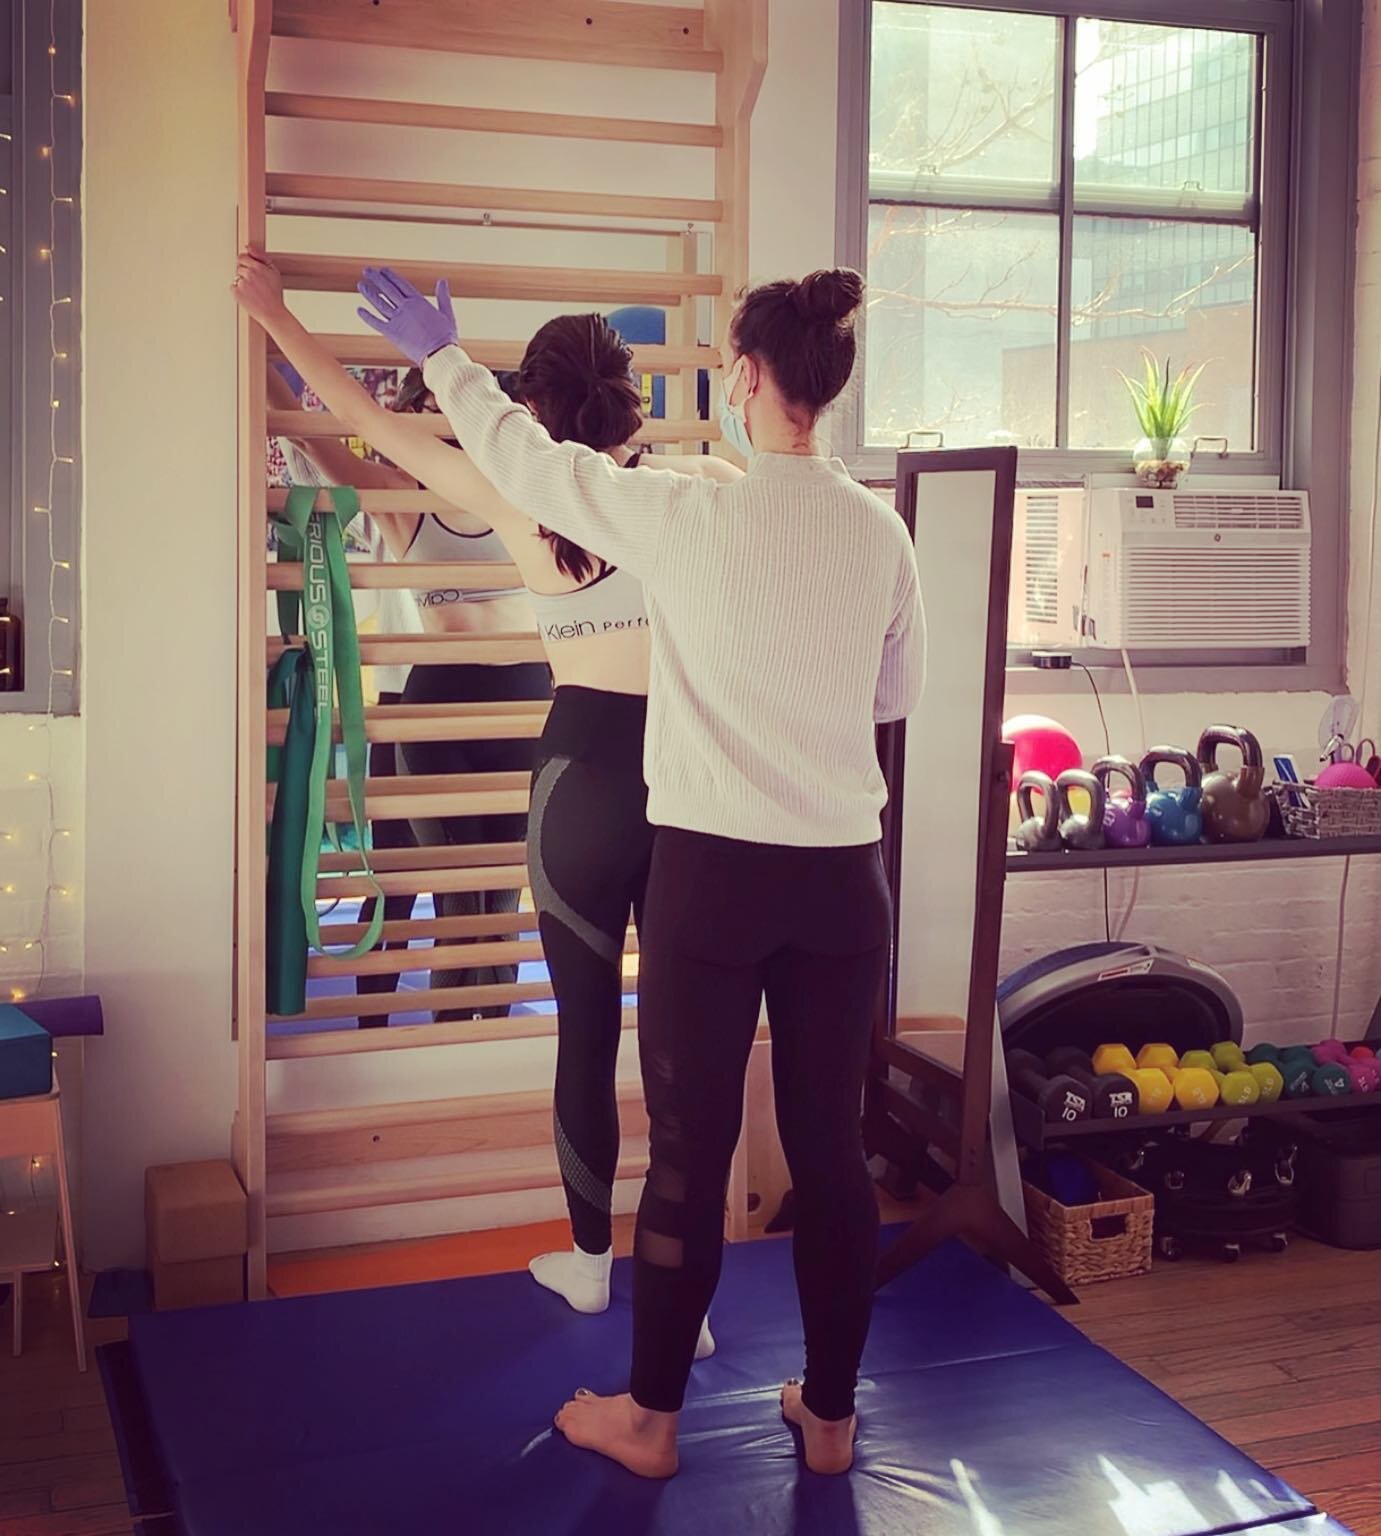 Working on postural stability in standing is a very important and challenging exercise, and for those with scoliosis, it can help to strengthen the muscles of the trunk to facilitate an improved standing posture. 
It&rsquo;s very challenging when per